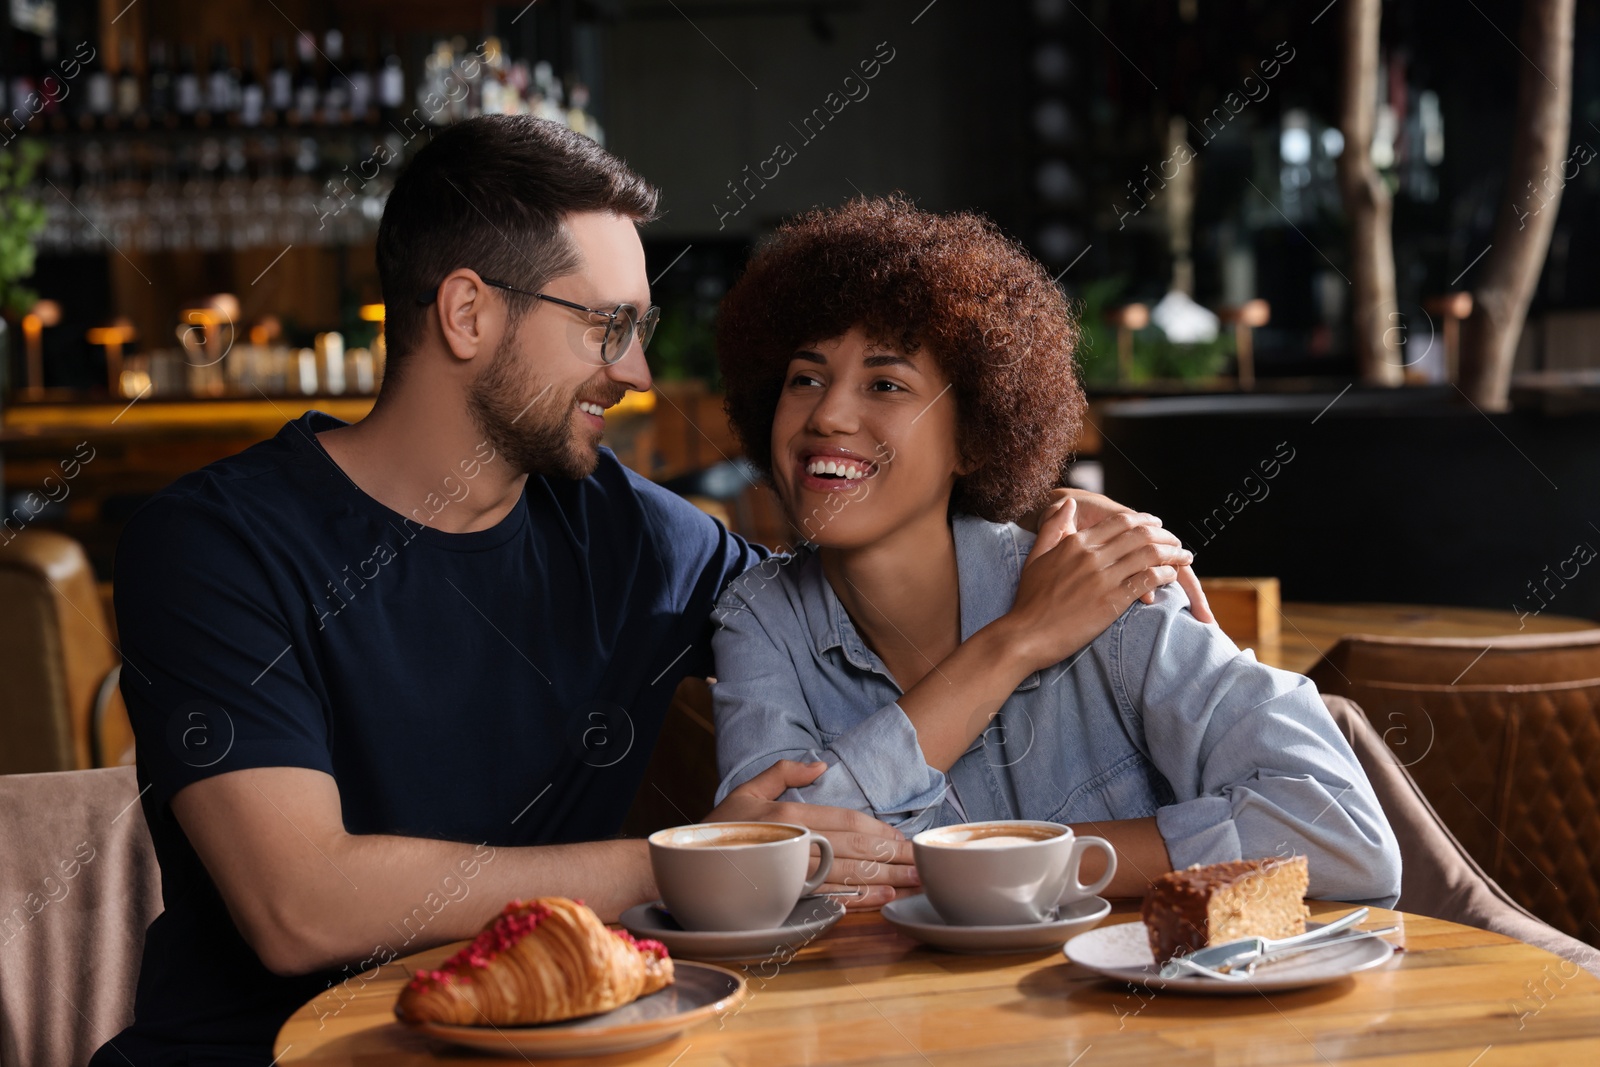 Photo of International dating. Lovely couple spending time together in cafe